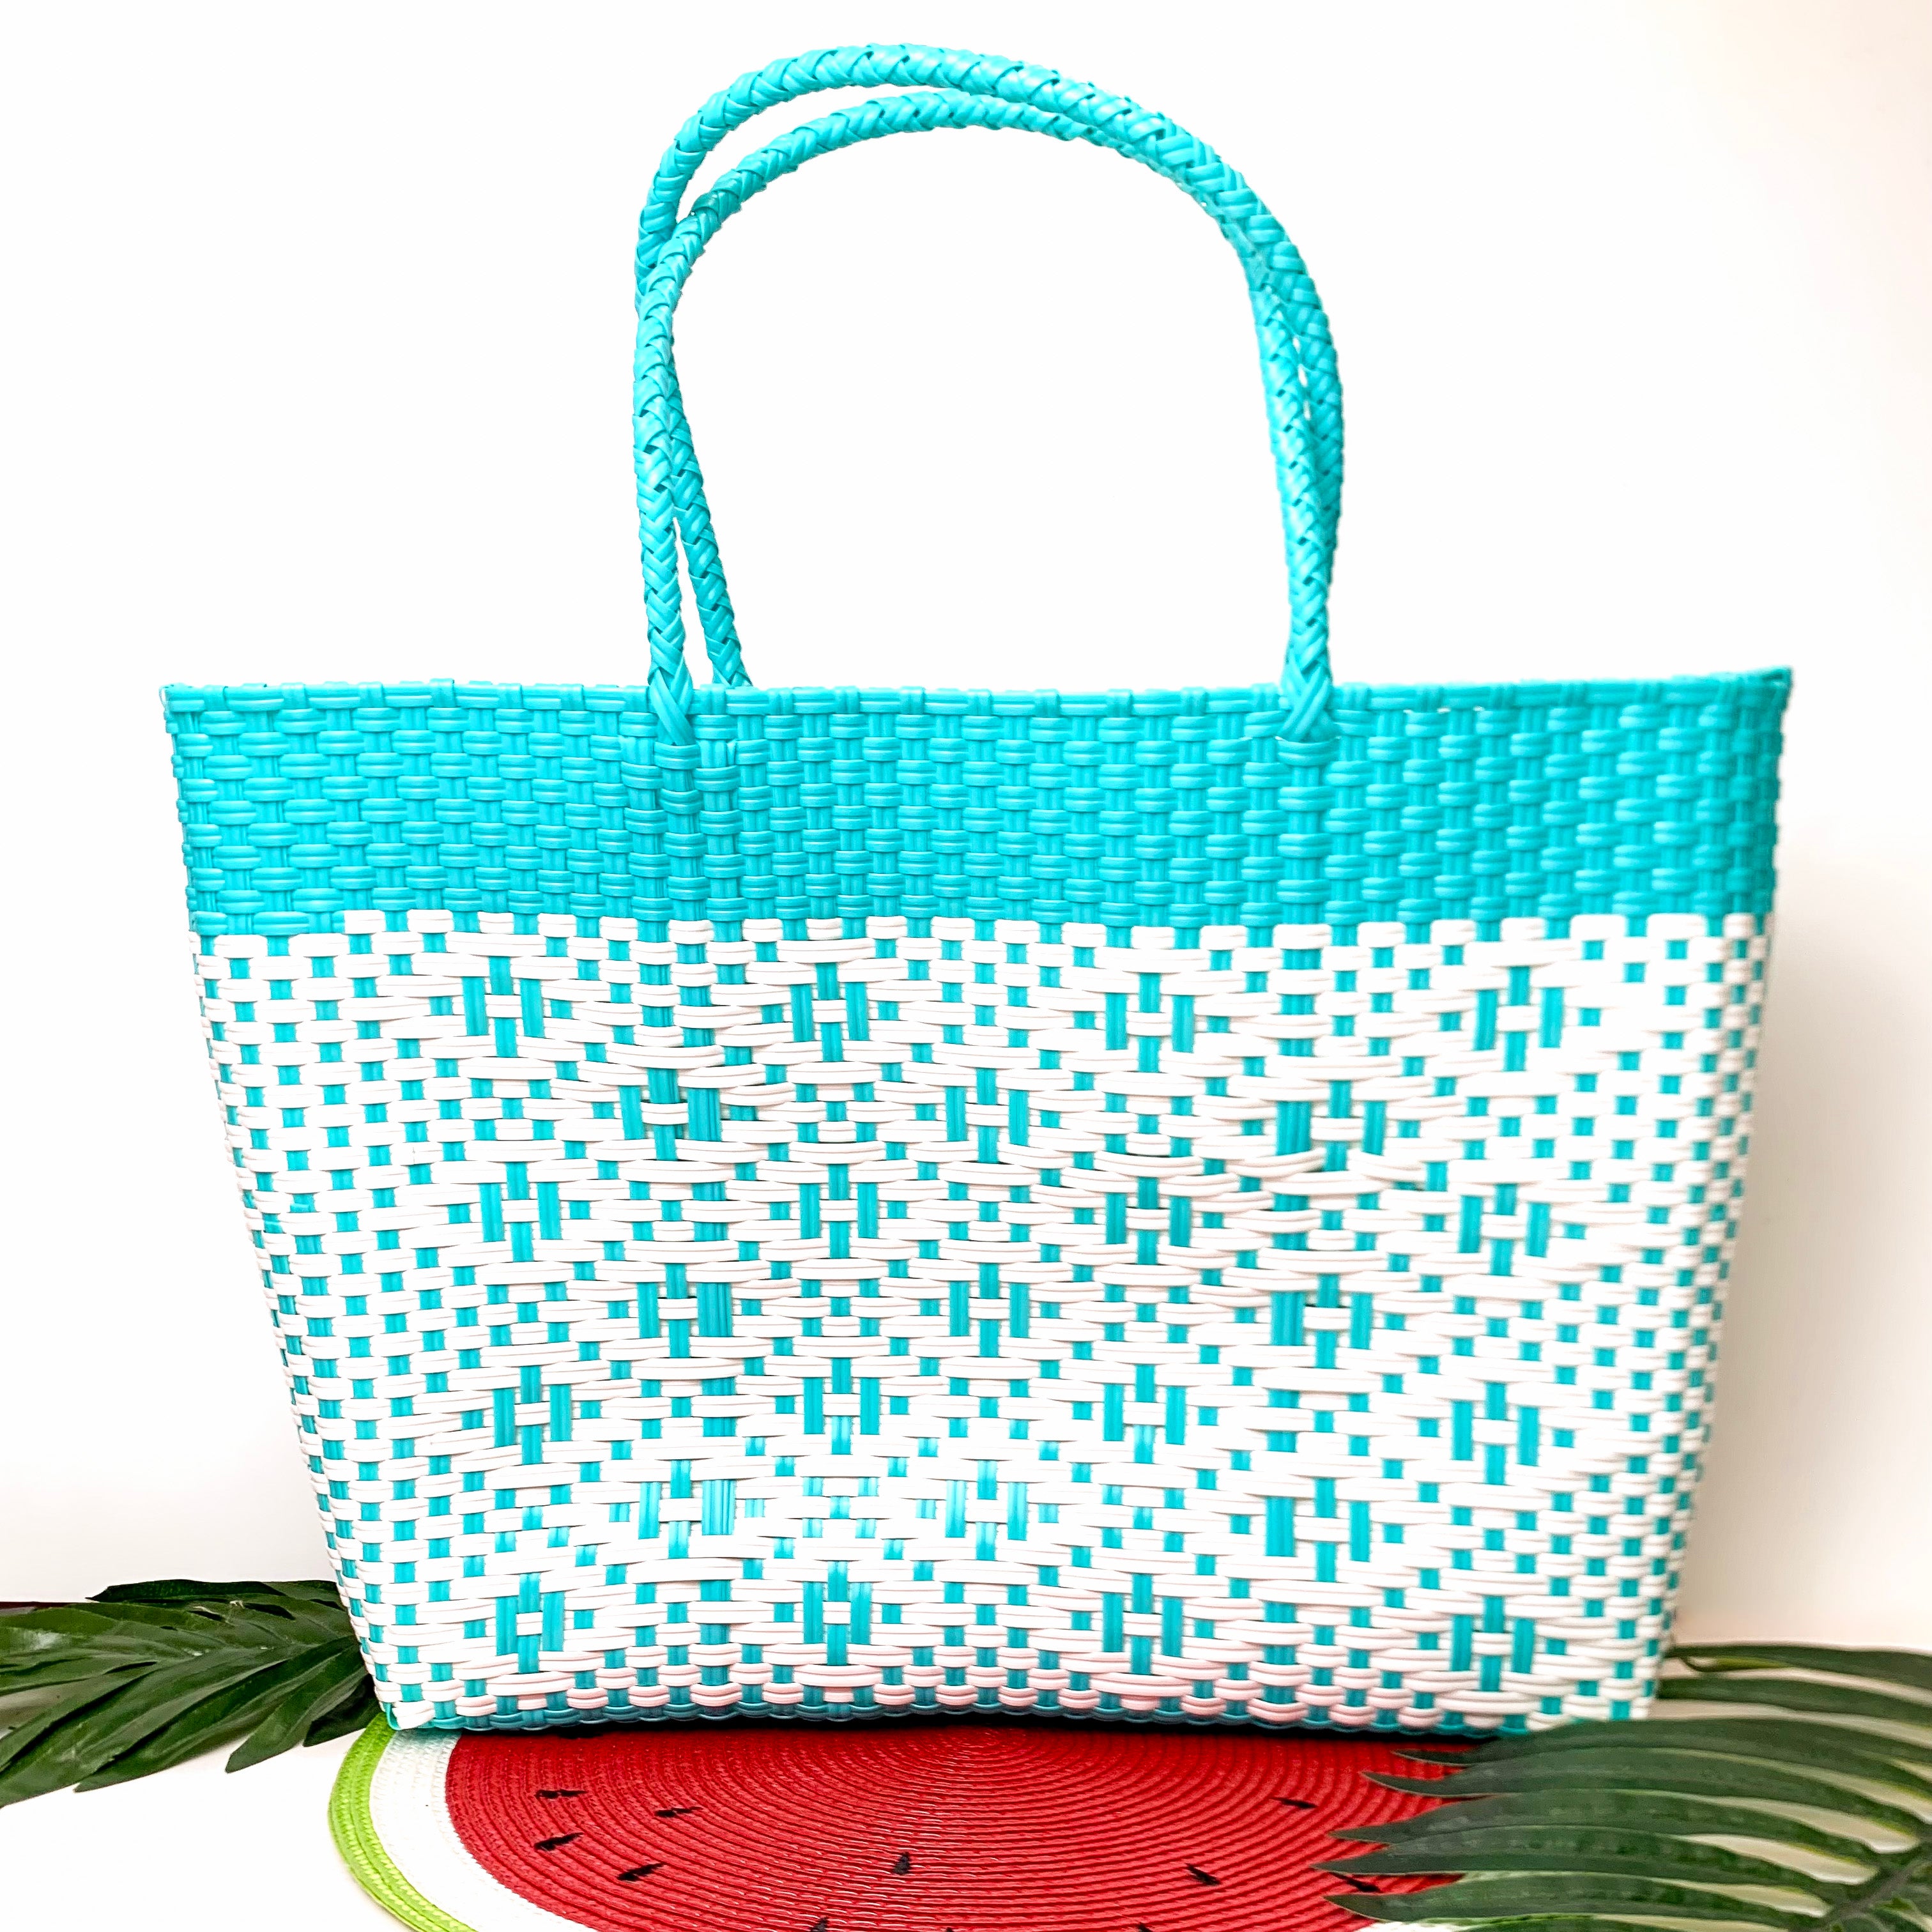 Sonoran Sky Market Tote Bag in Turquoise Blue and White - Giddy Up Glamour Boutique